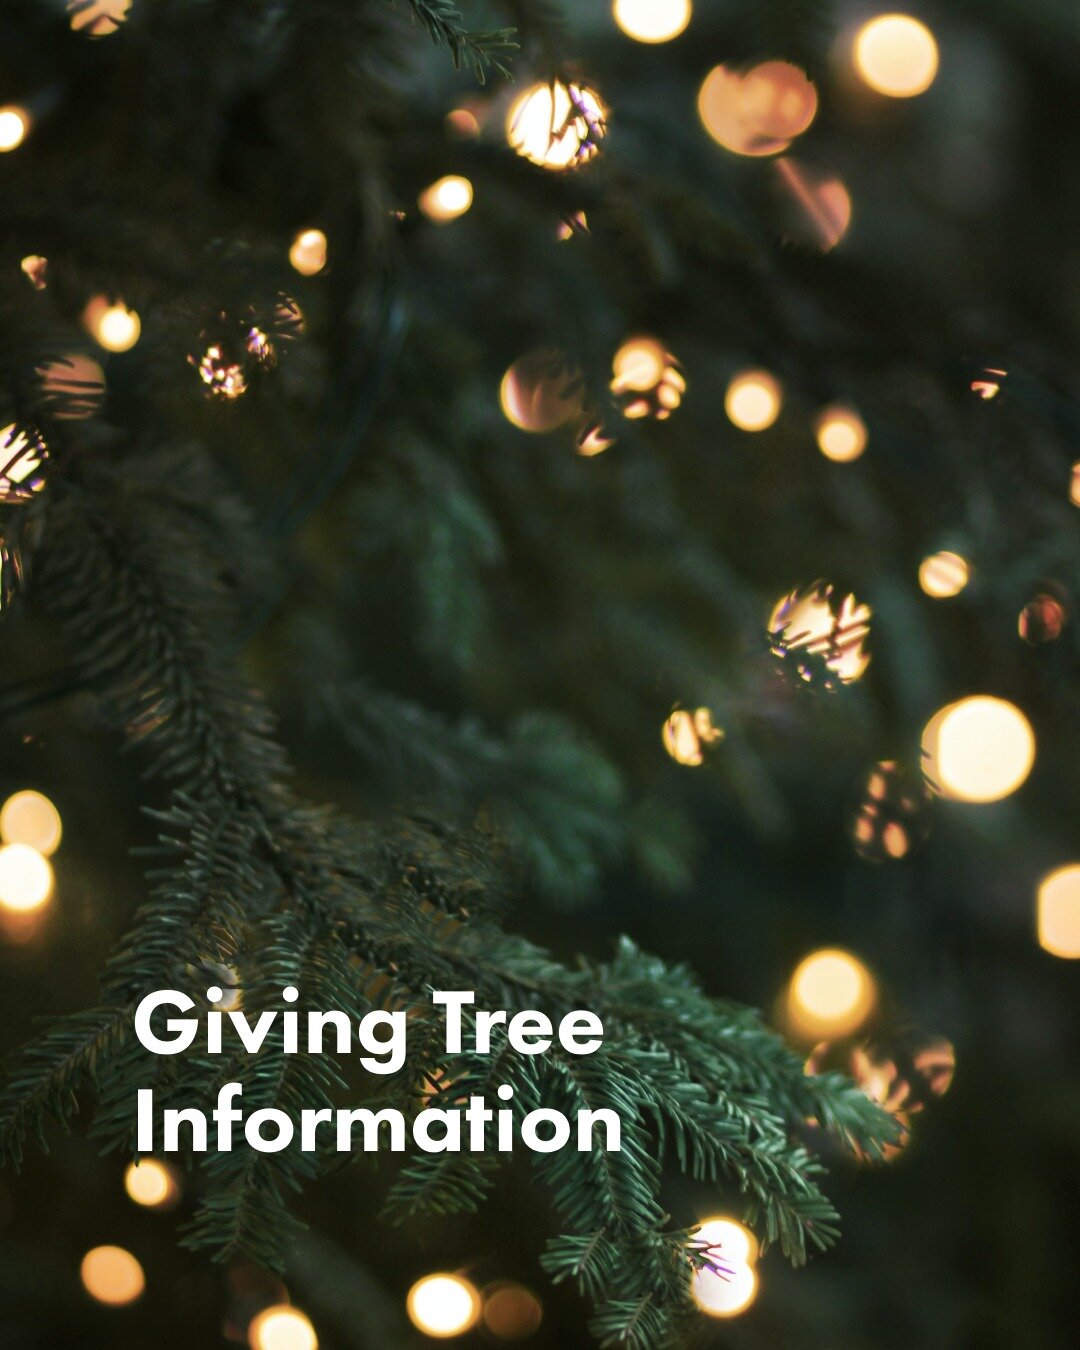 CHRISTMAS GIVING TREE
Various dates, October &ndash; December
Annual gift program for low income families

This year we&rsquo;re bringing back our vibrant, in person, Giving Tree program and we are looking forward to involving many parishioners in sh